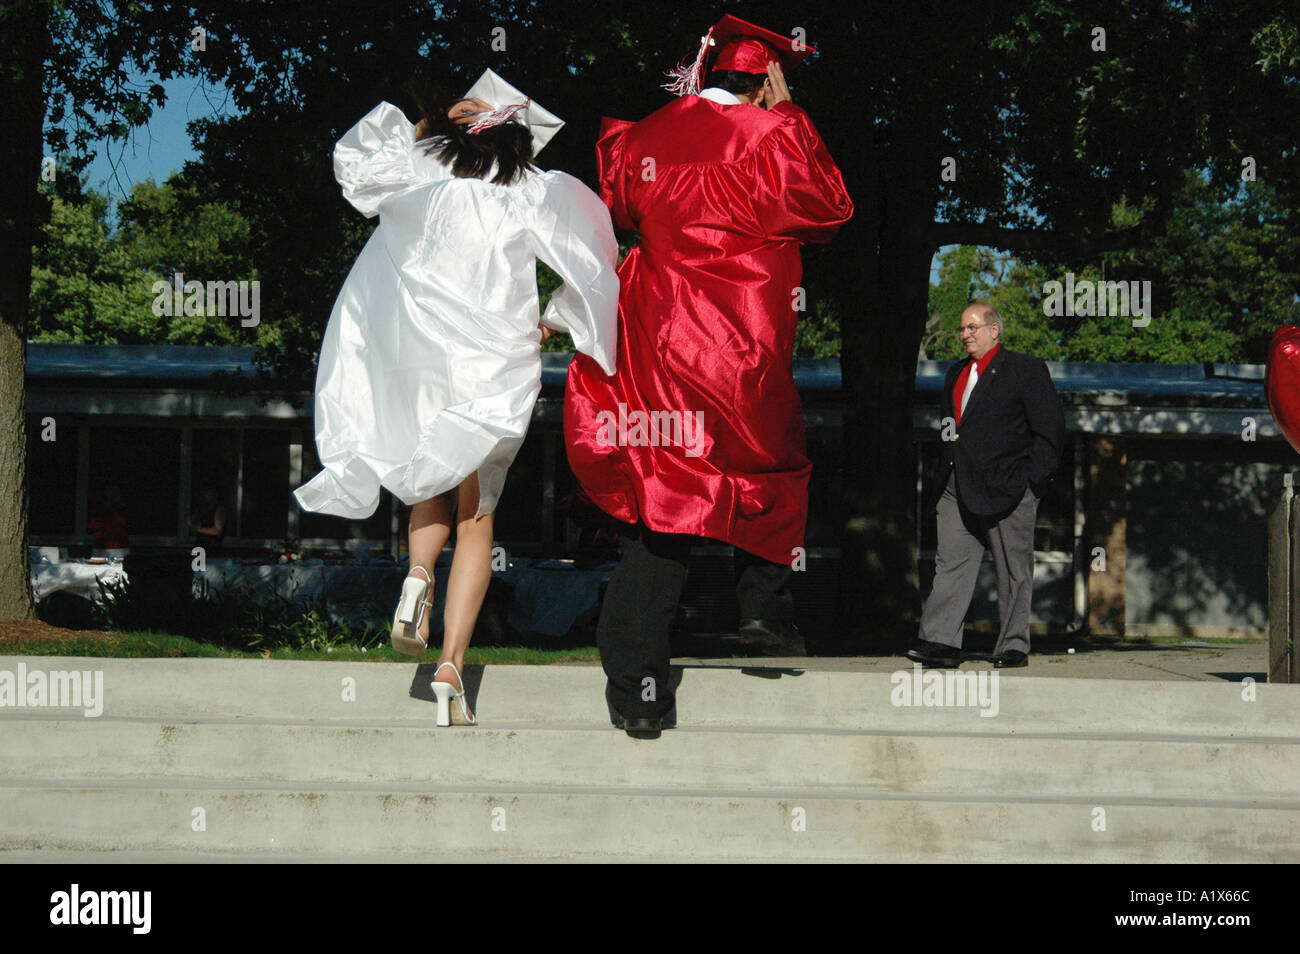 two high school graduate graduates late running for graduation ceremonies up steps Stock Photo